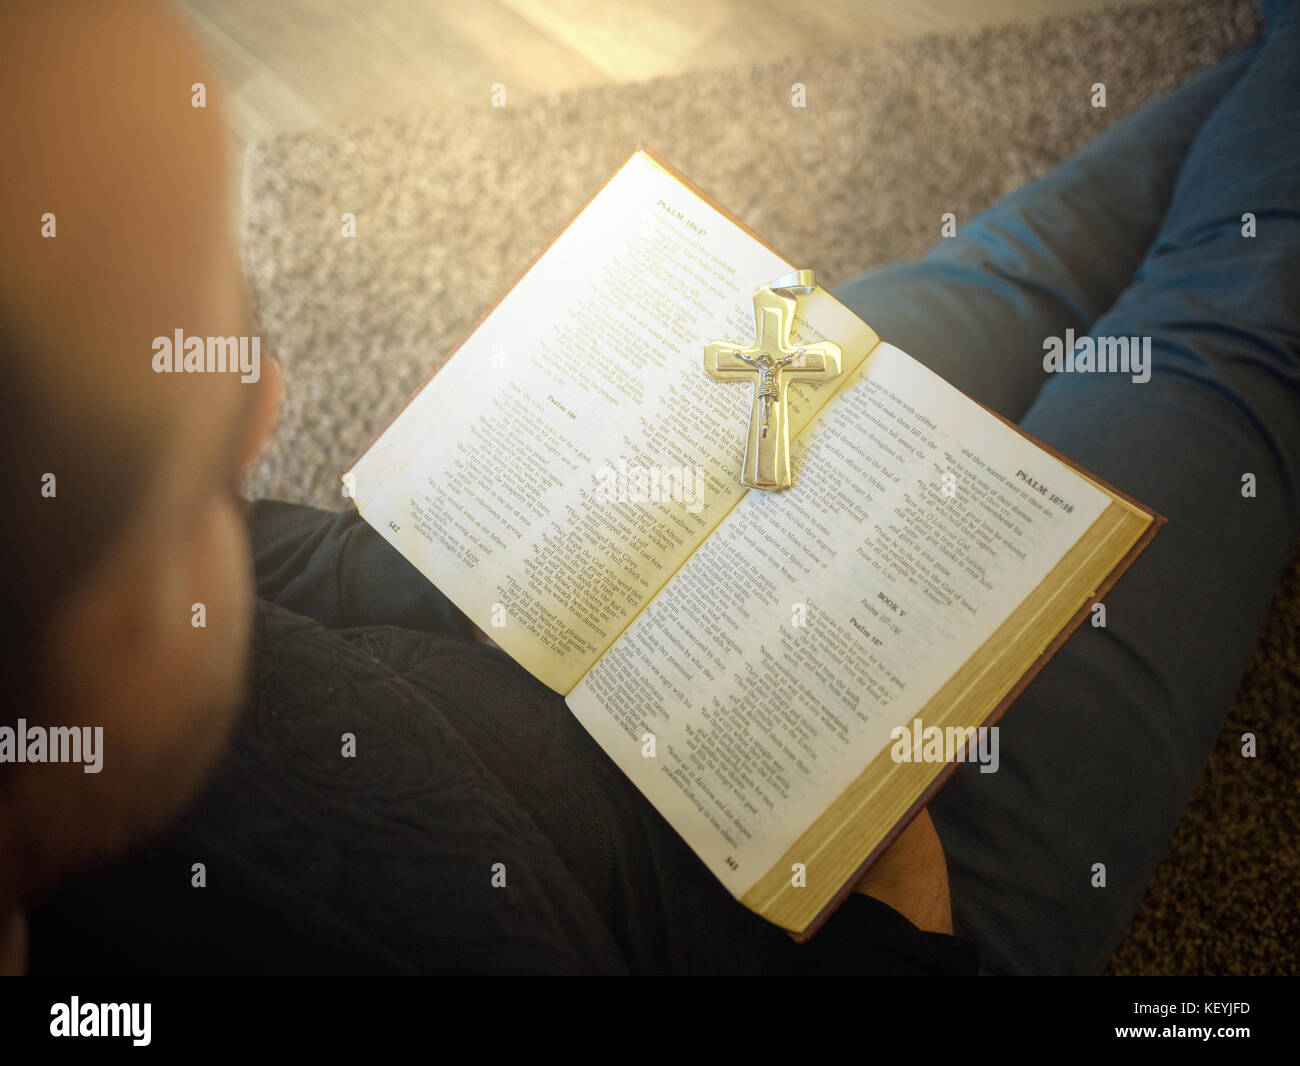 Man reading bible with a cross on it Stock Photo